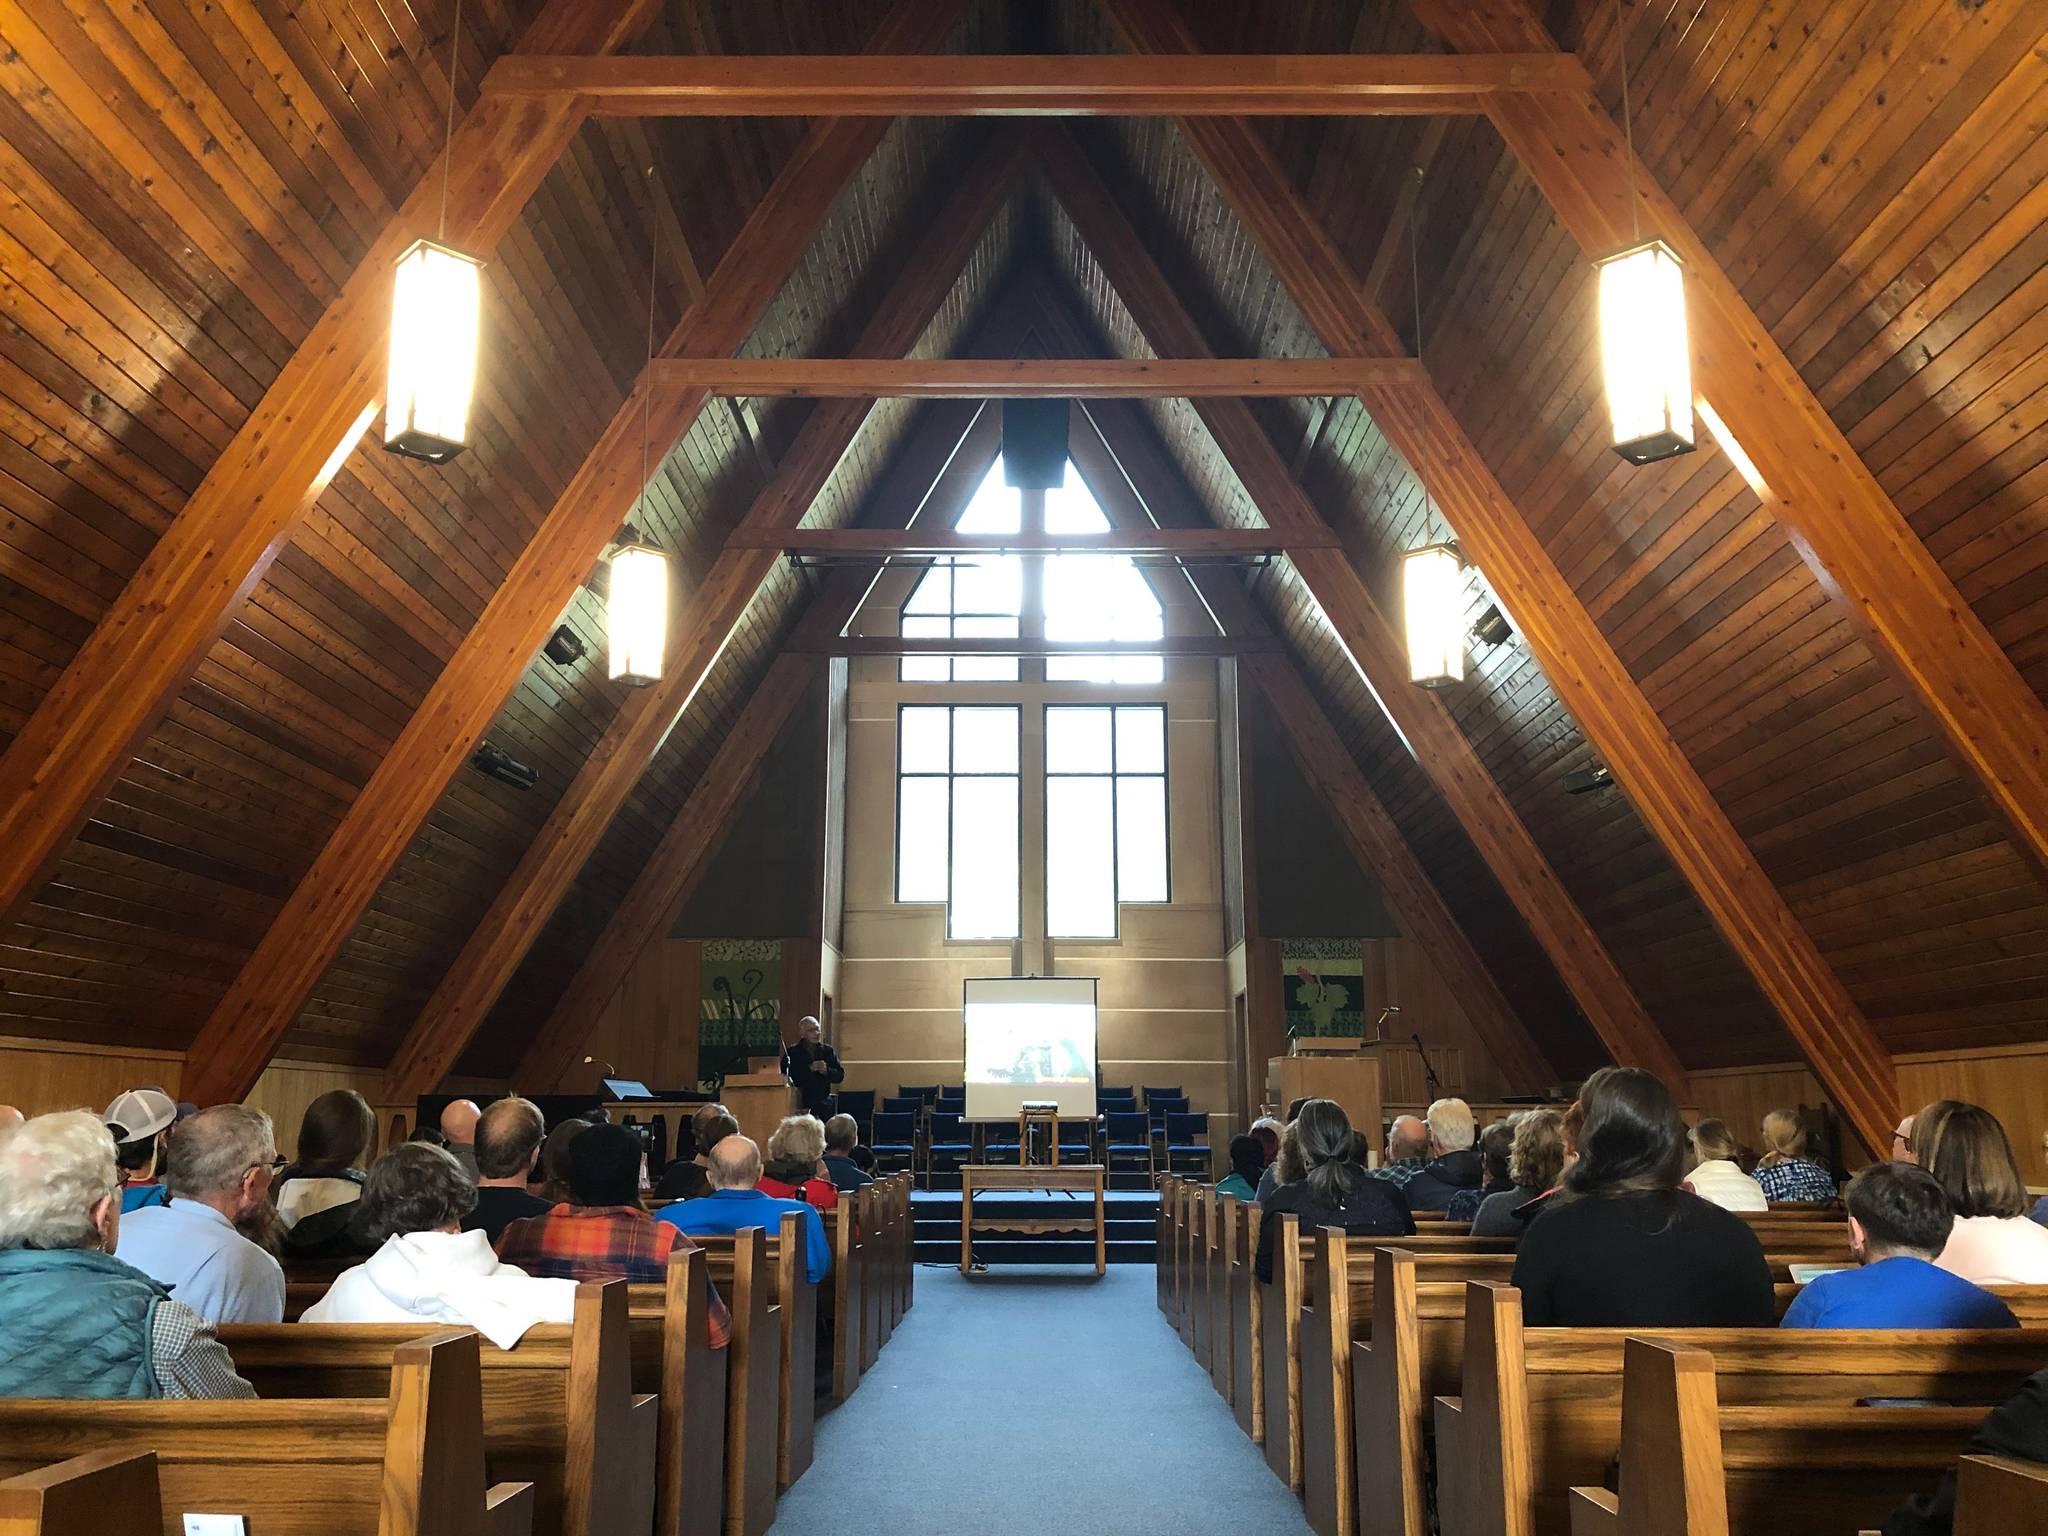 Rev. Charles Brower speaks at Northern Light United Church in Juneau during the “Climate Change Through the Eyes of Alaska Natives,” forum on Sept. 12, 2019. (Peter Segall | Juneau Empire)